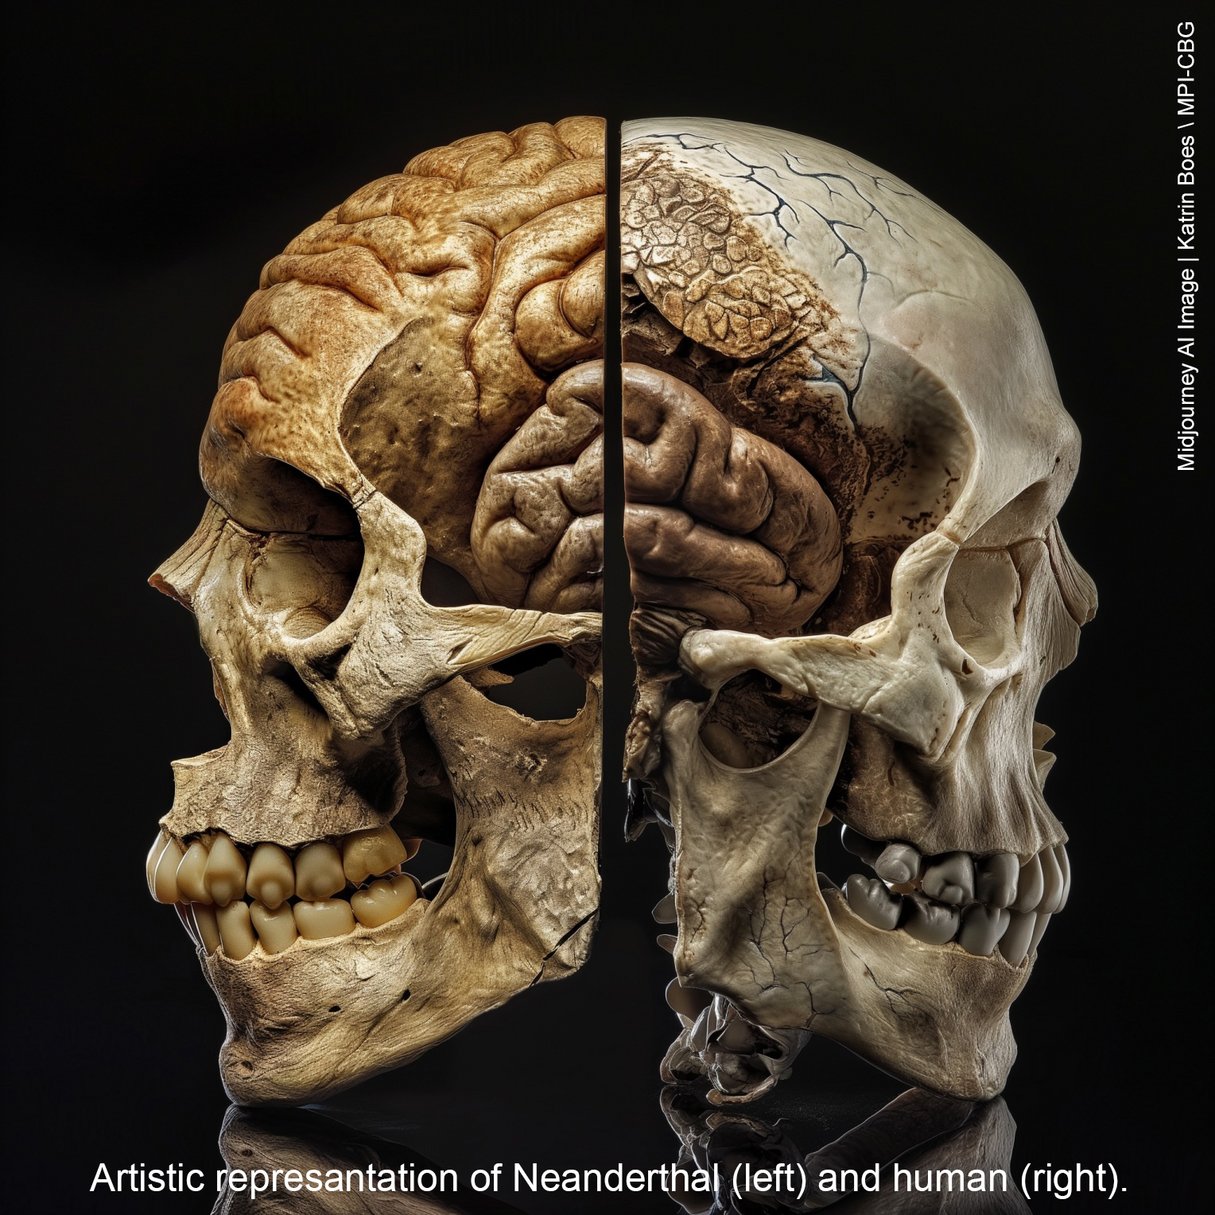 The development of the human brain - what distinguishes us from Neanderthals